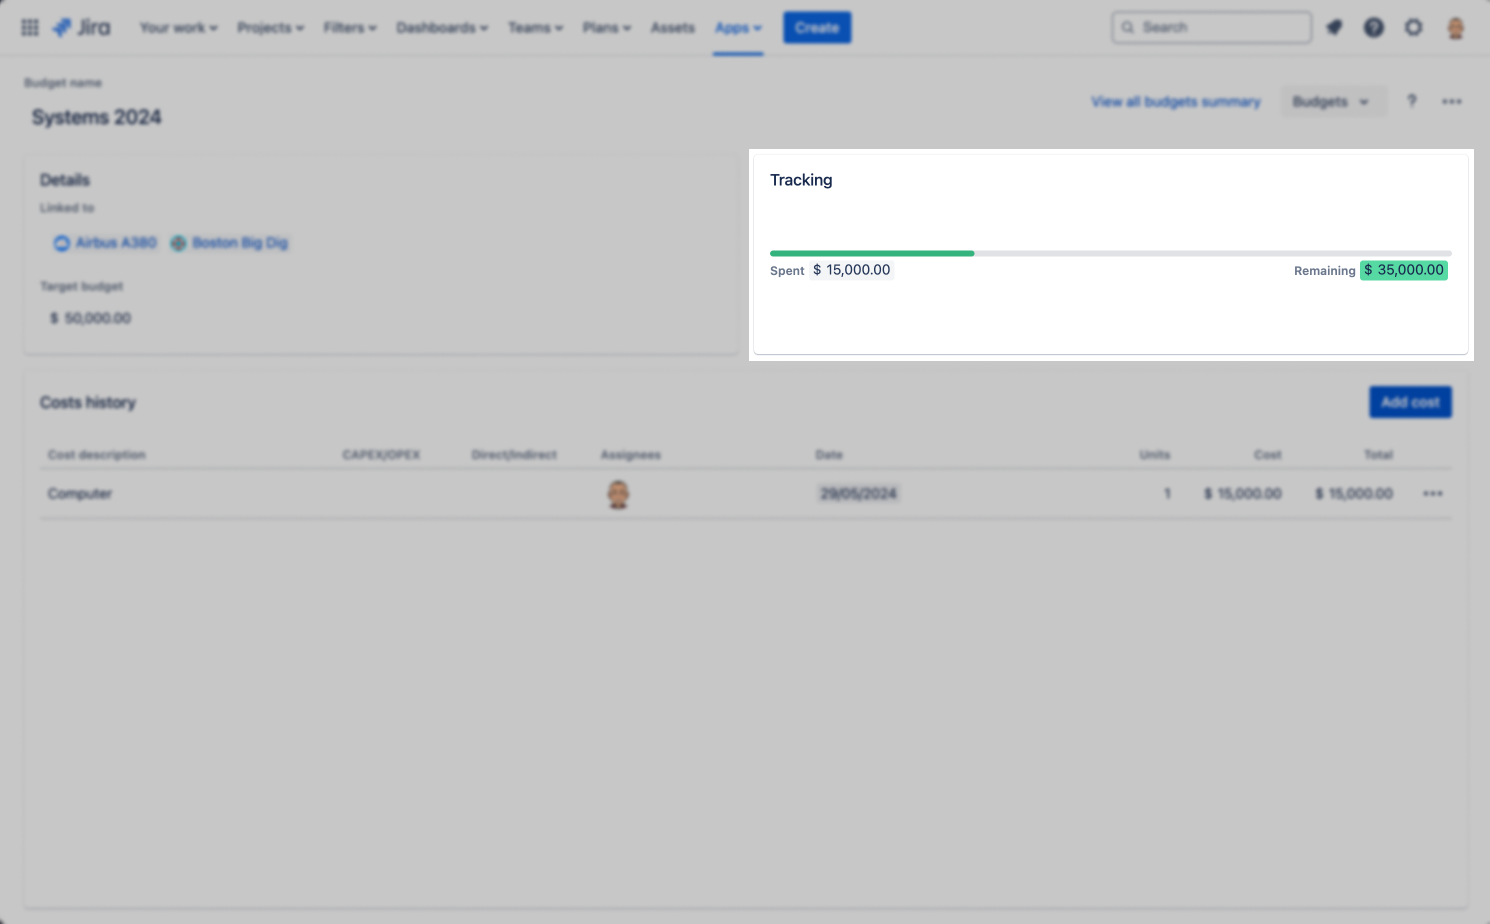 Track the budget of your projects in Jira